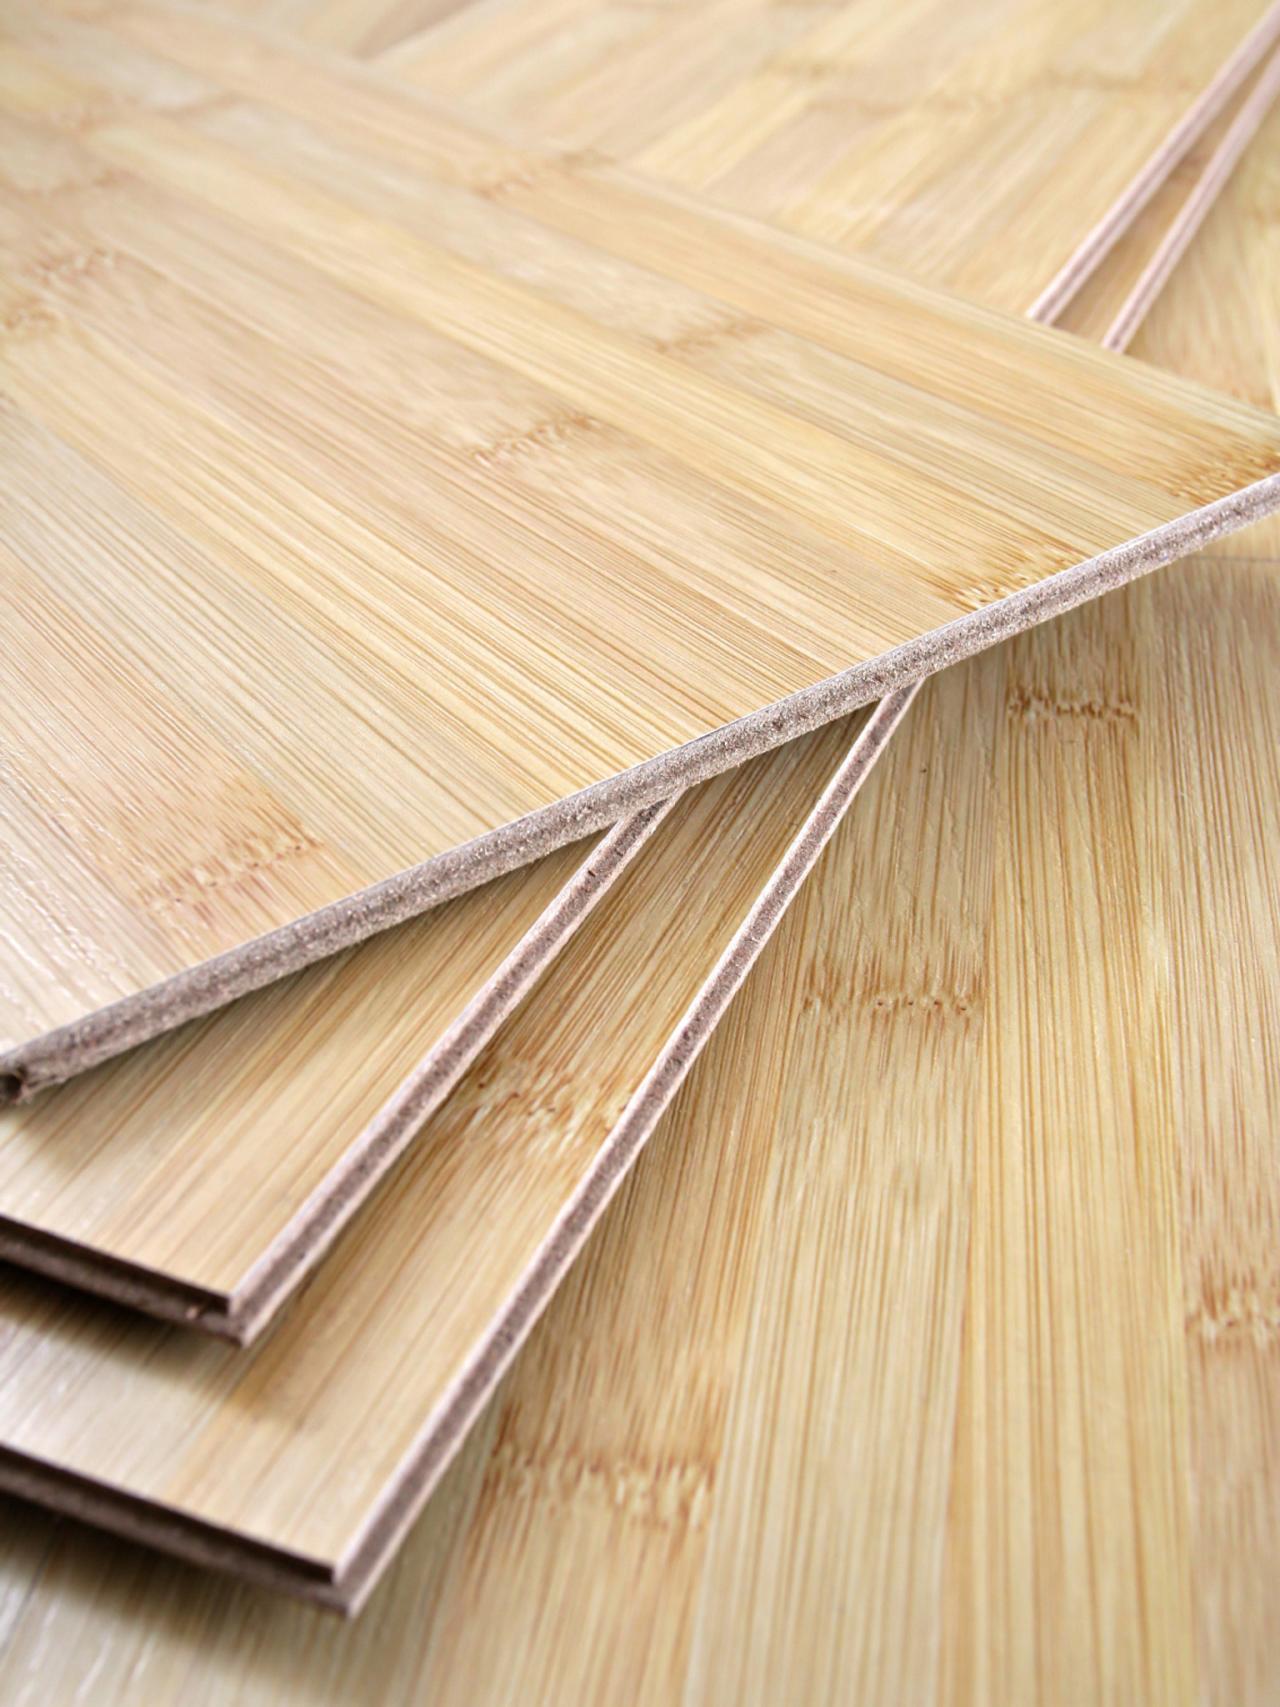 The Pros And Cons Of Bamboo Flooring Diy, Which Is Better Bamboo Or Laminate Flooring